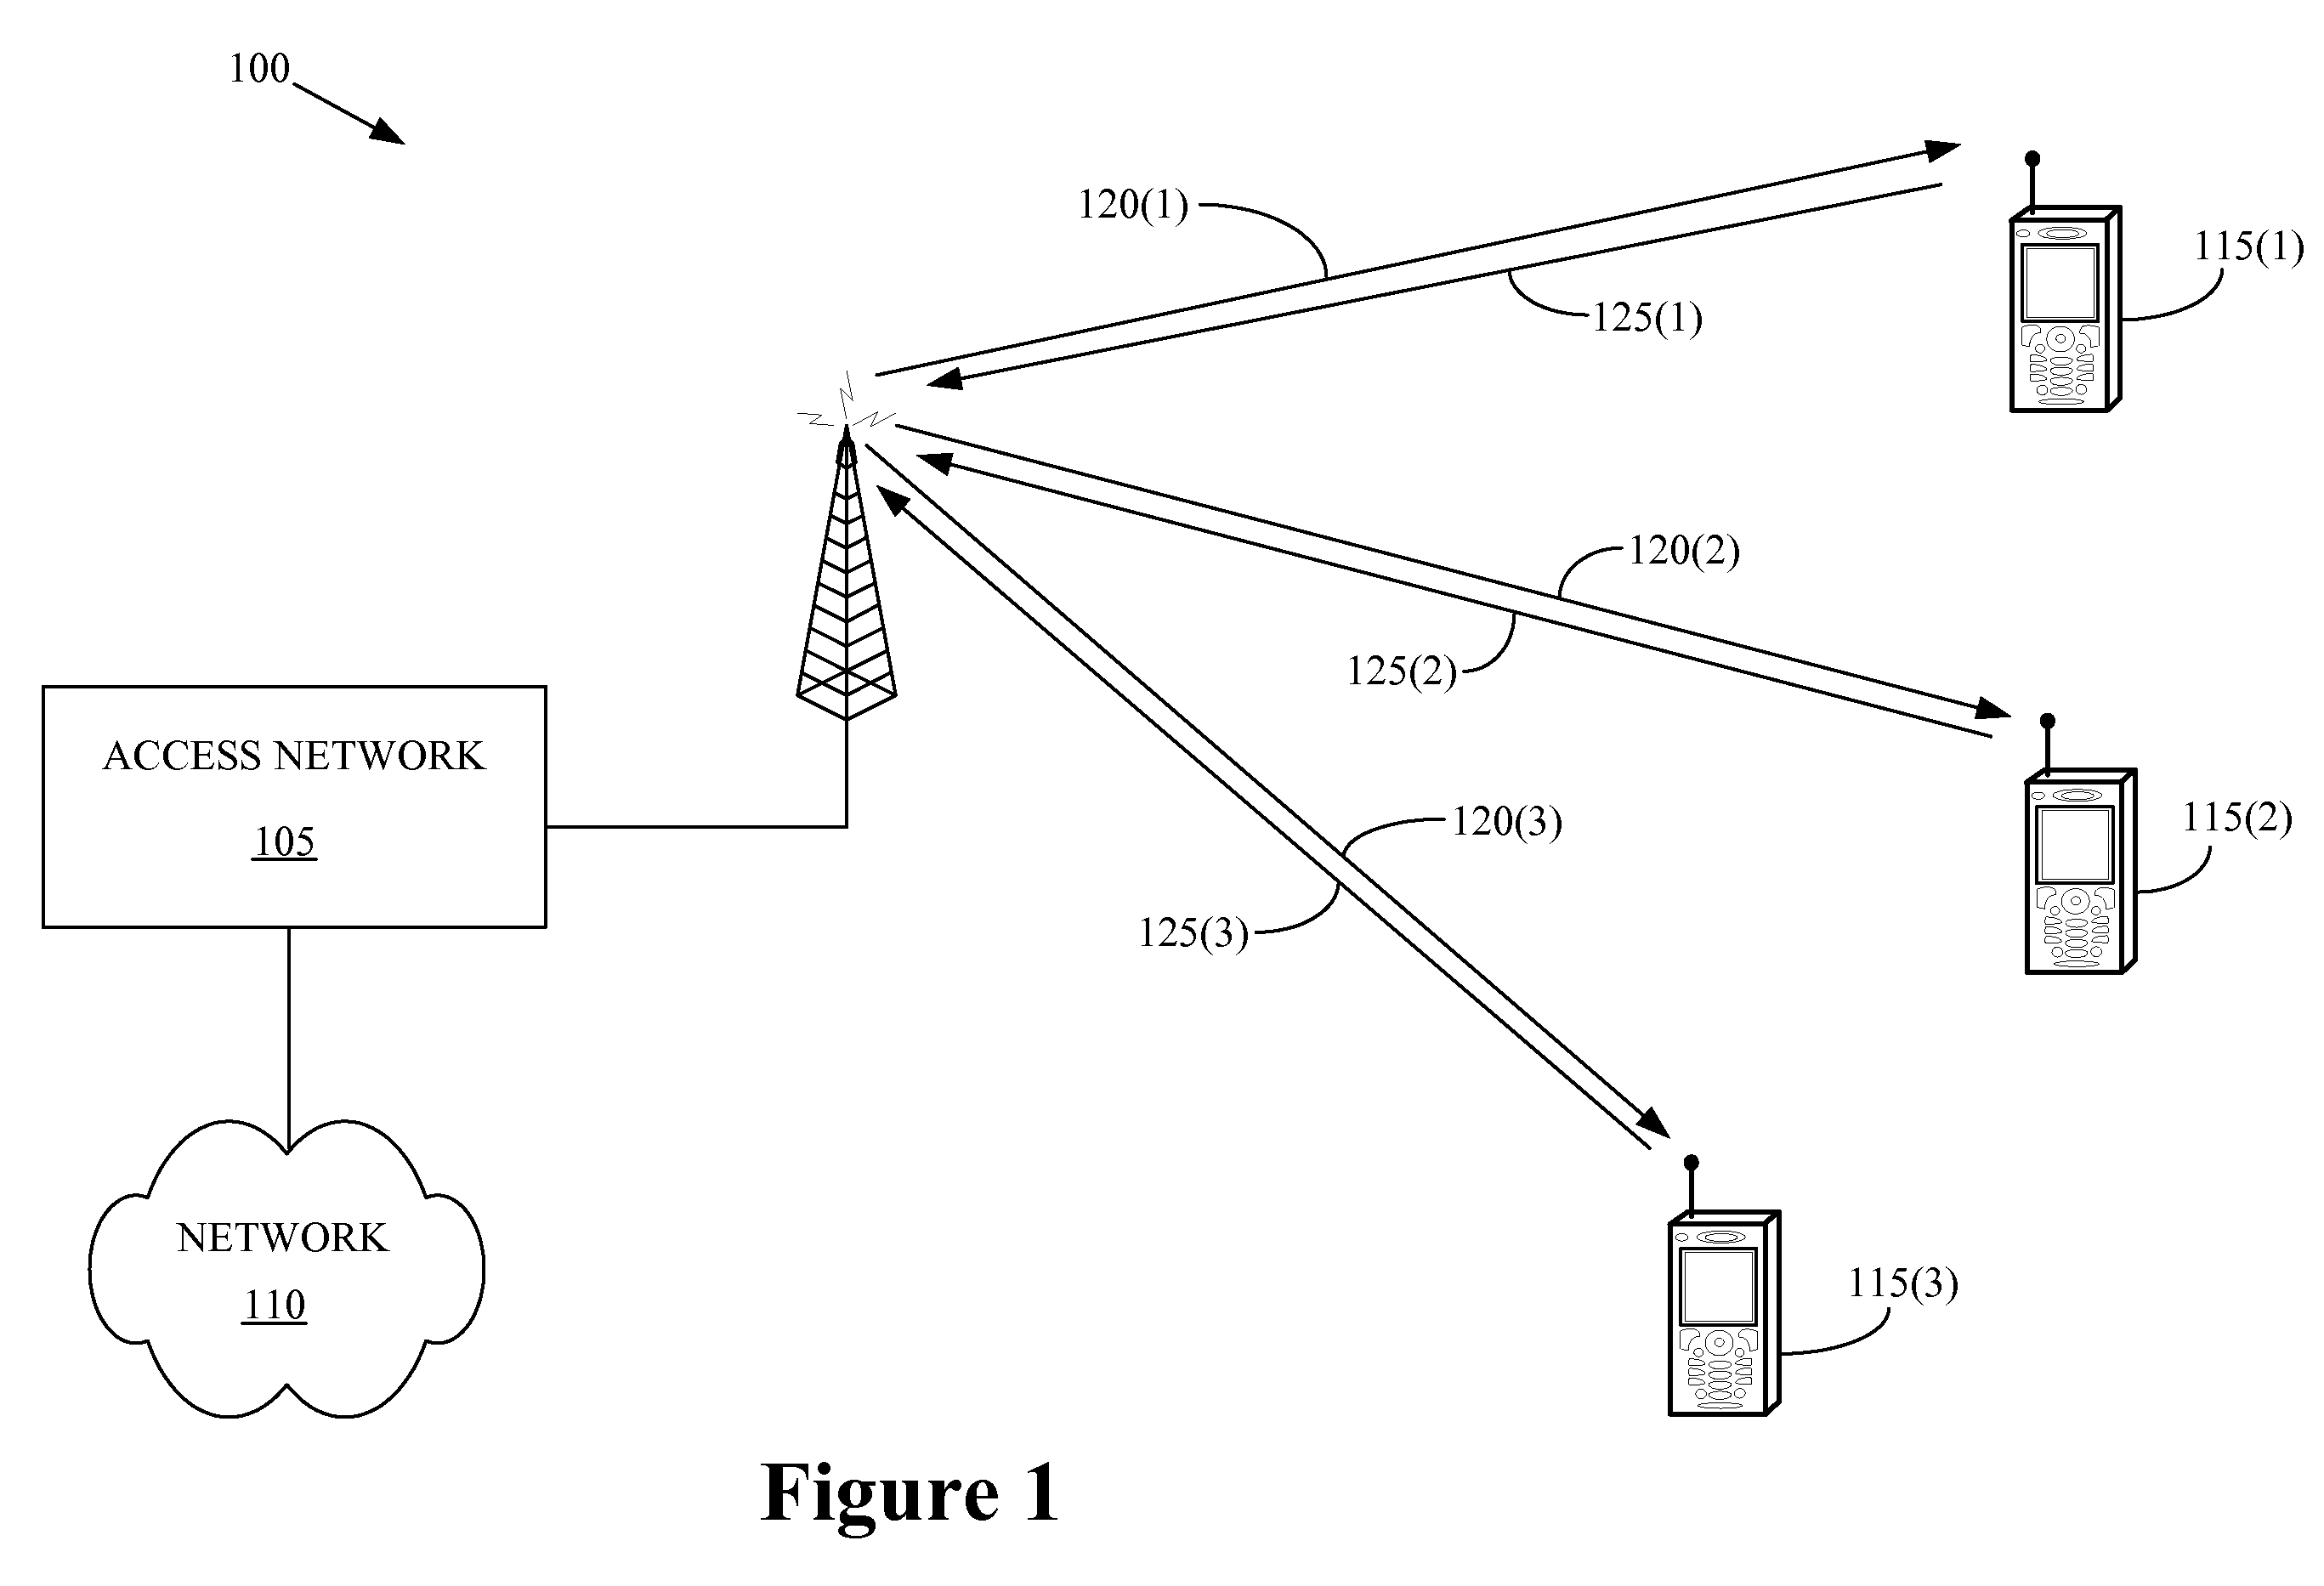 Method of controlling mobile unit response messages on an access channel